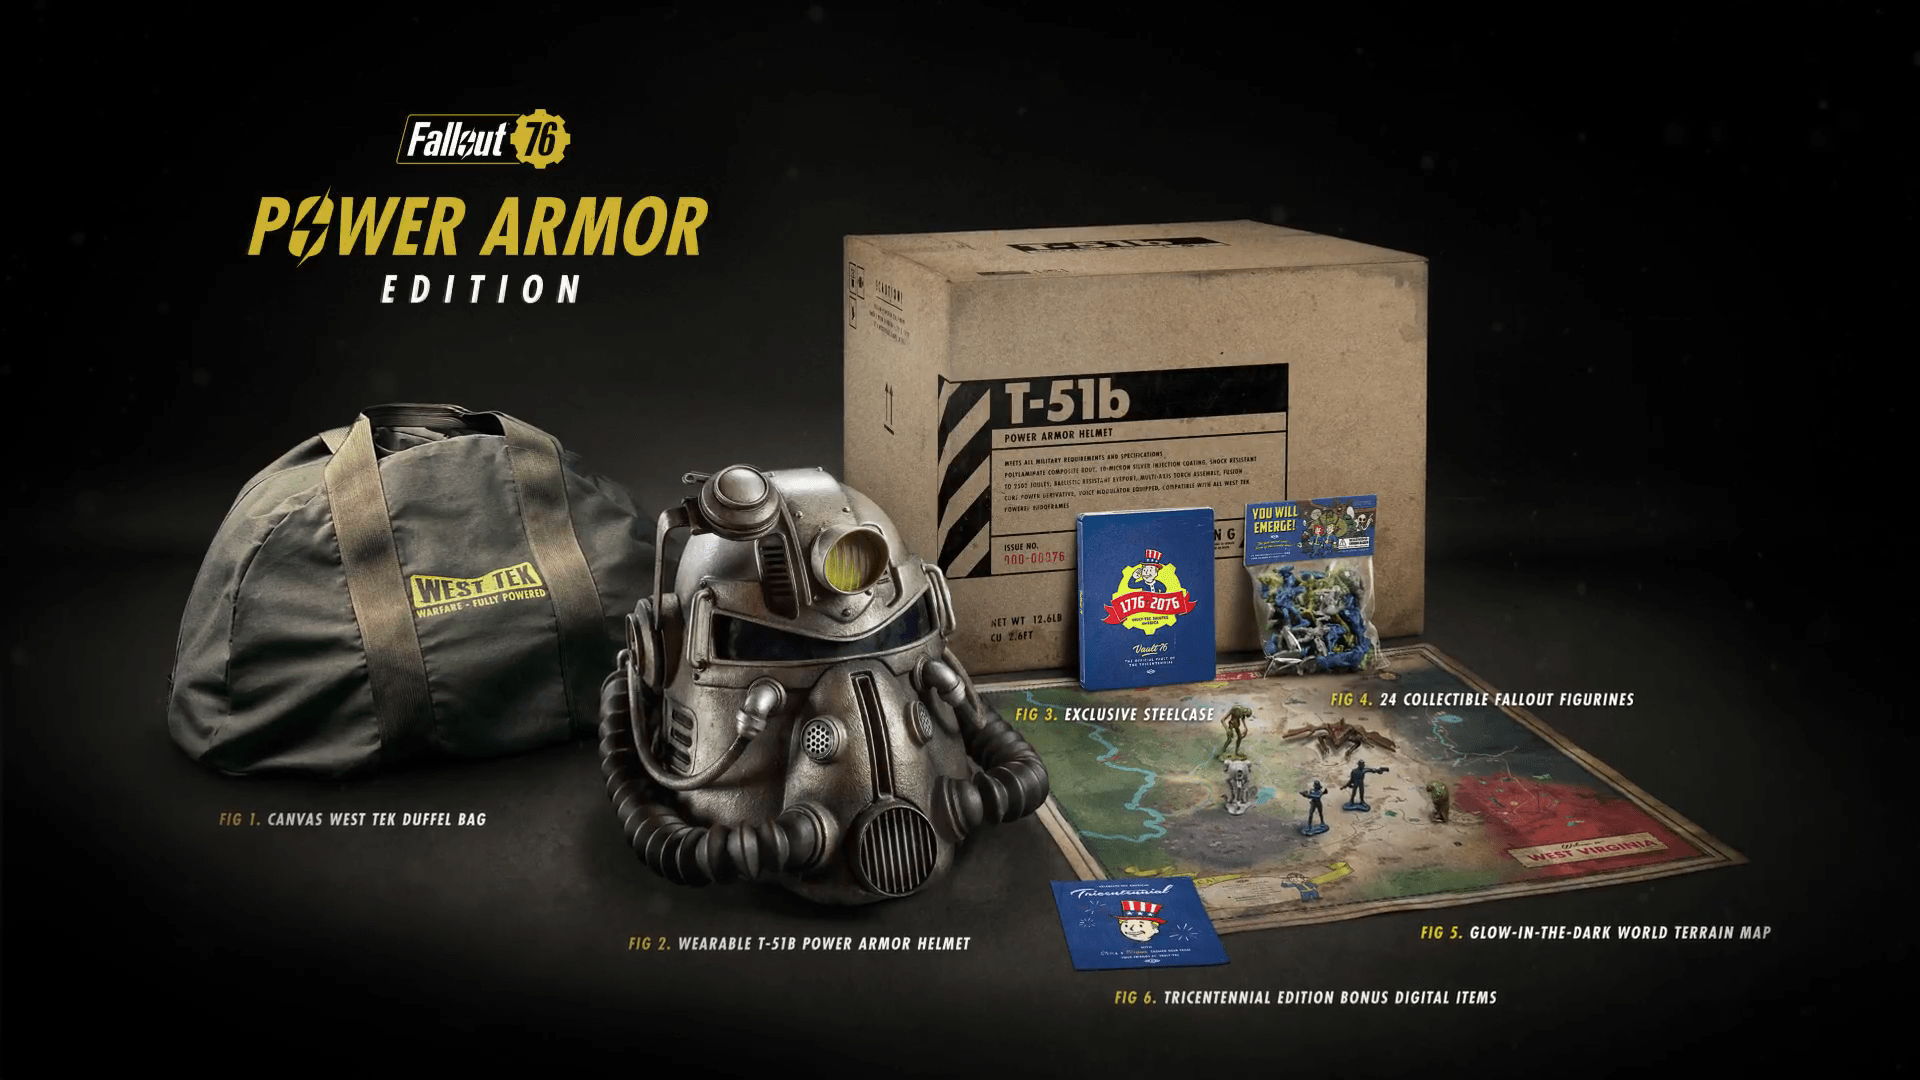 Finally, Bethesda Sends Out Fallout 76 Canvas Bags To Disgruntled Fans Who Purchased Power Armor Edition